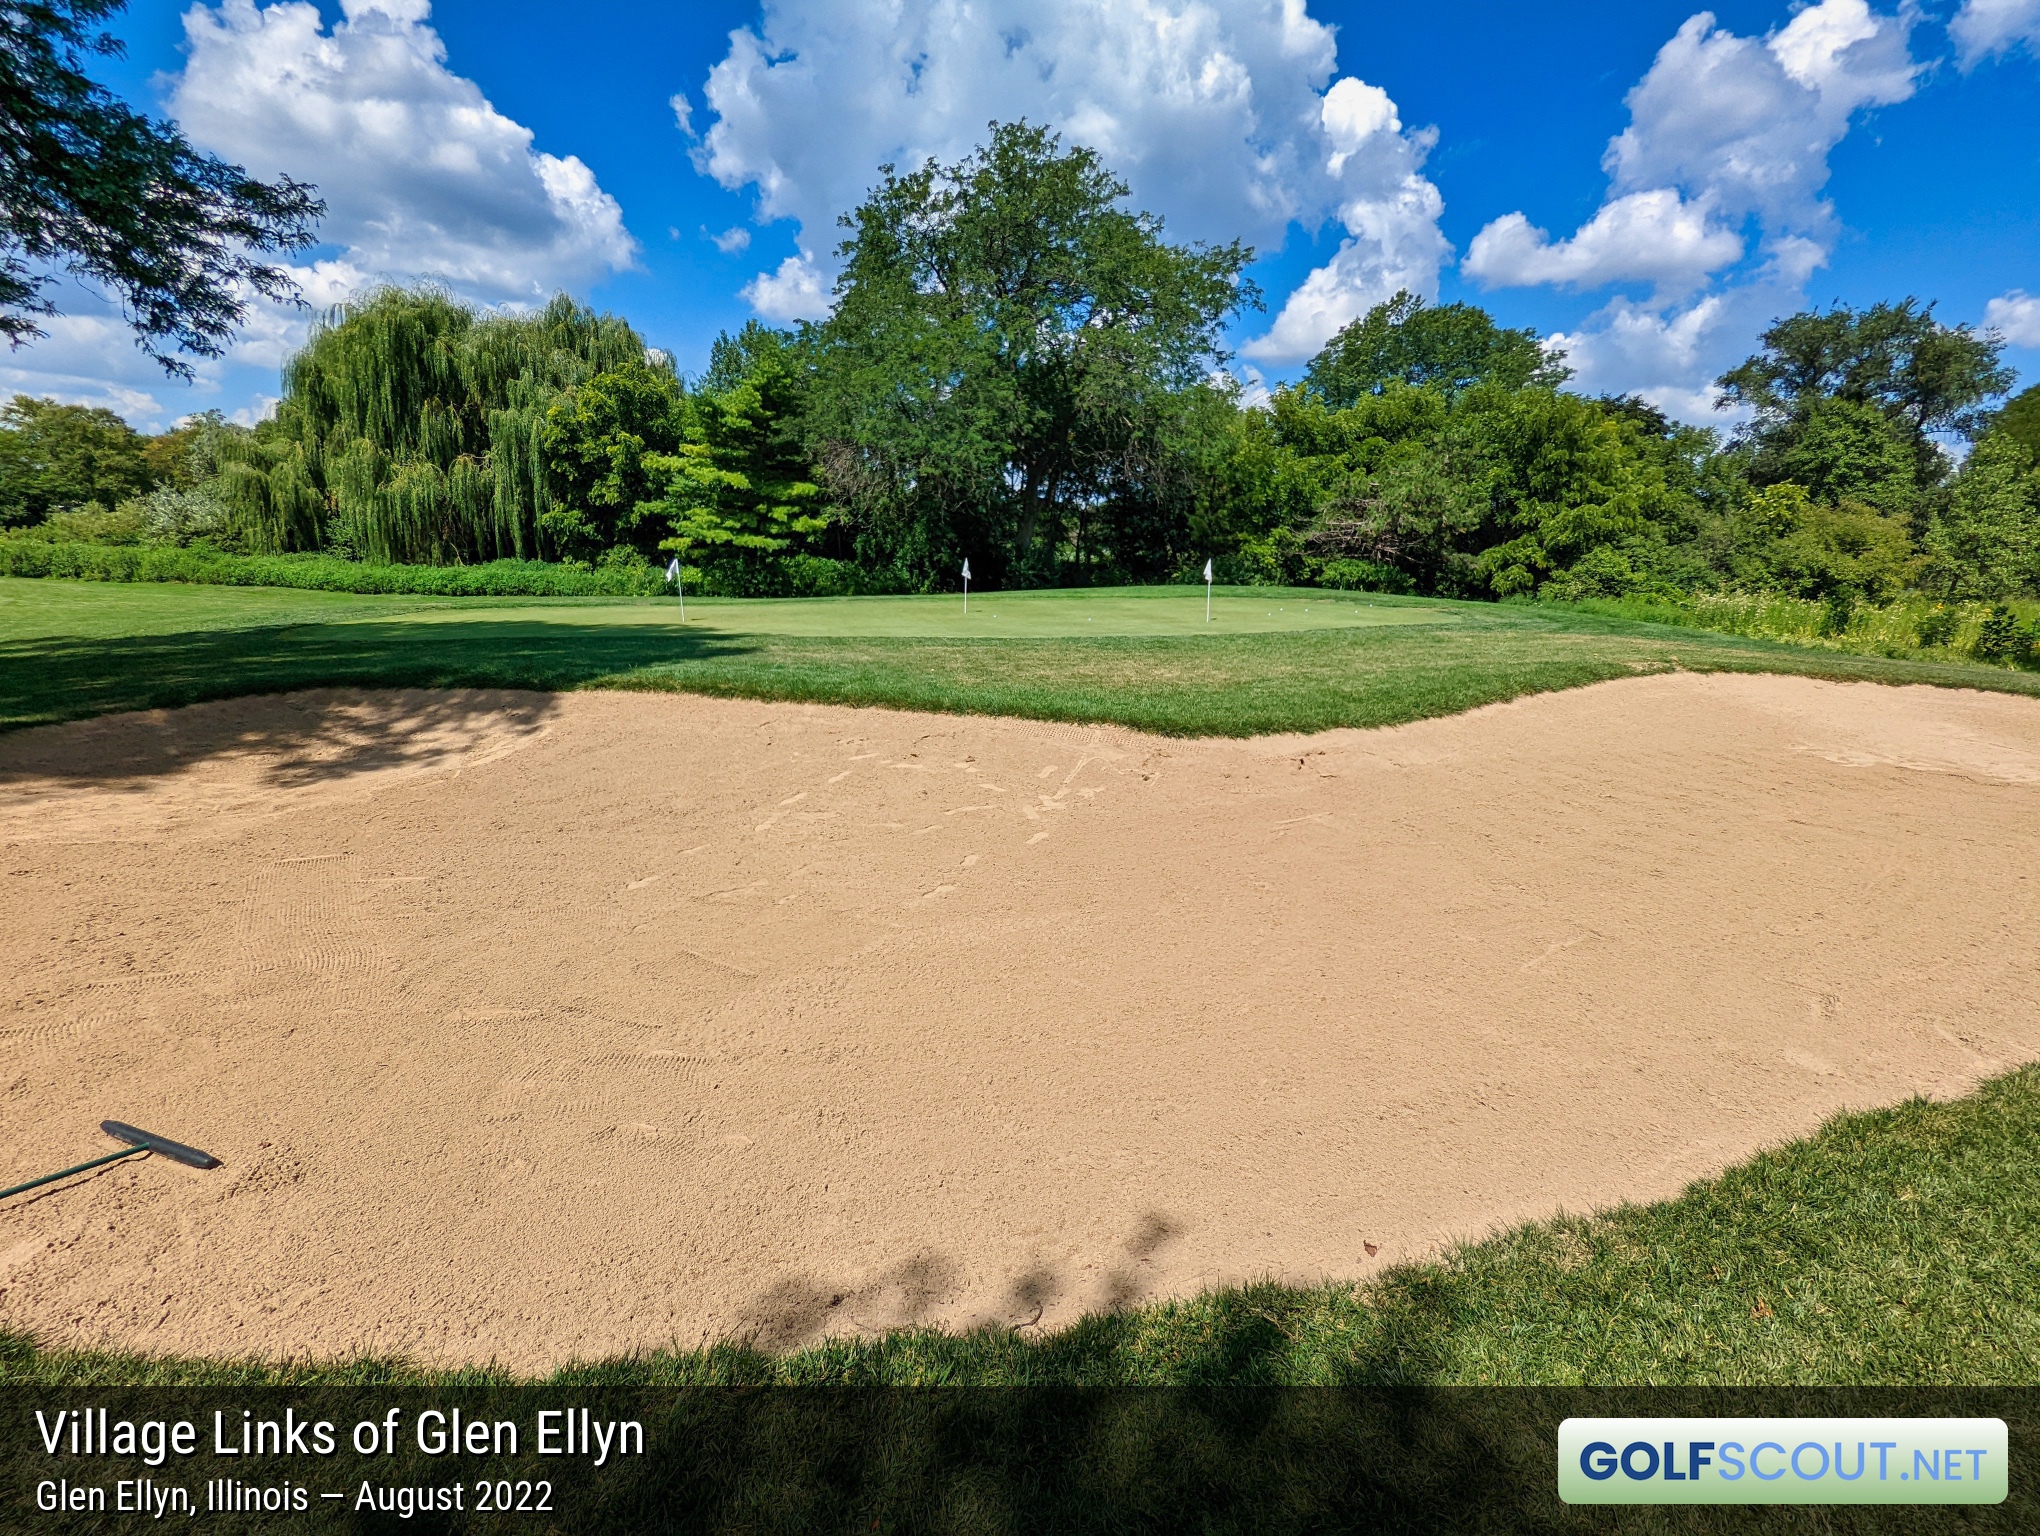 Photo of the practice area at Village Links of Glen Ellyn - 18 Hole Course in Glen Ellyn, Illinois. 